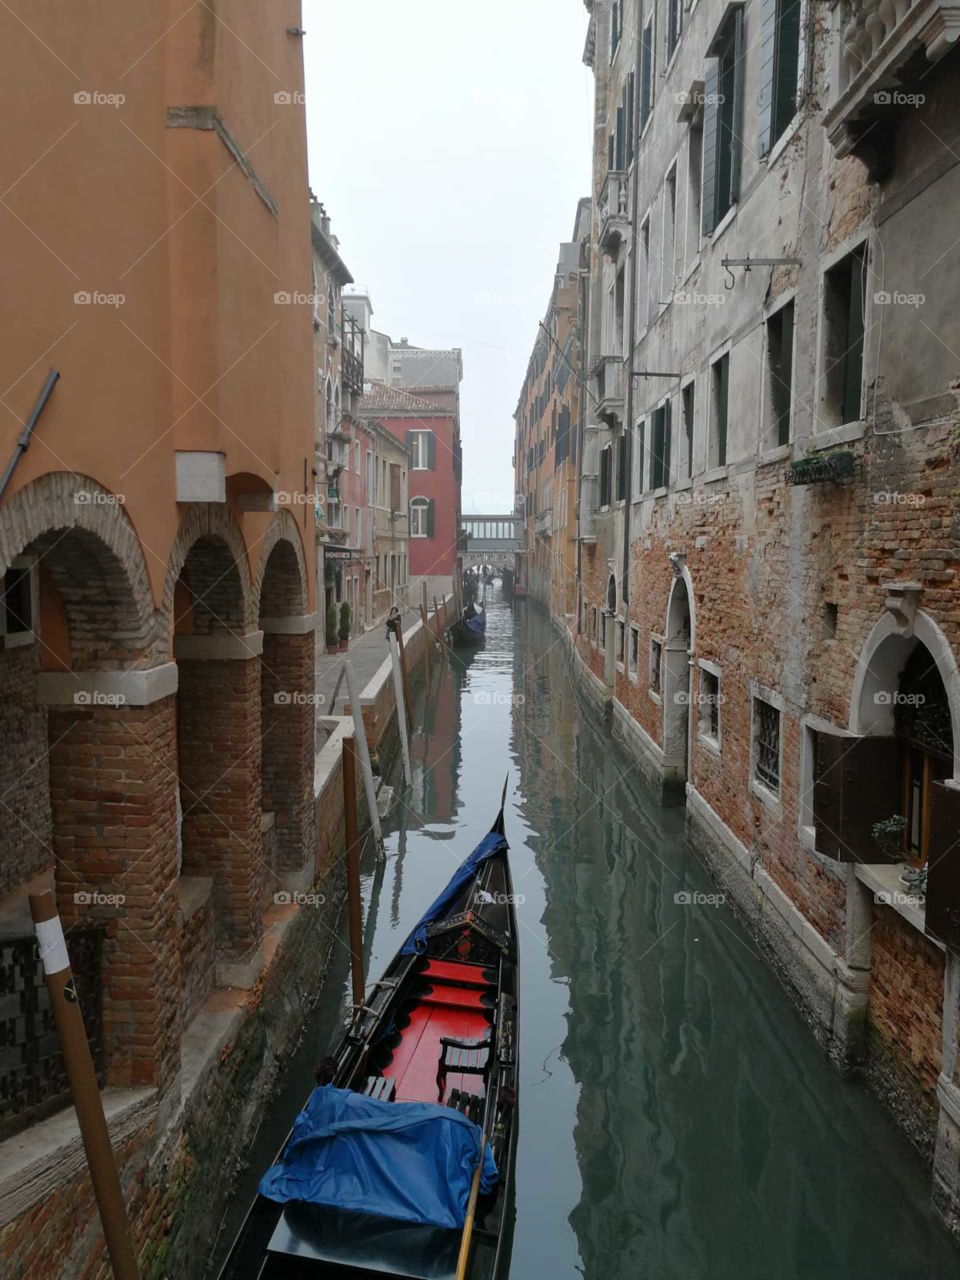 canal in venice with gondola